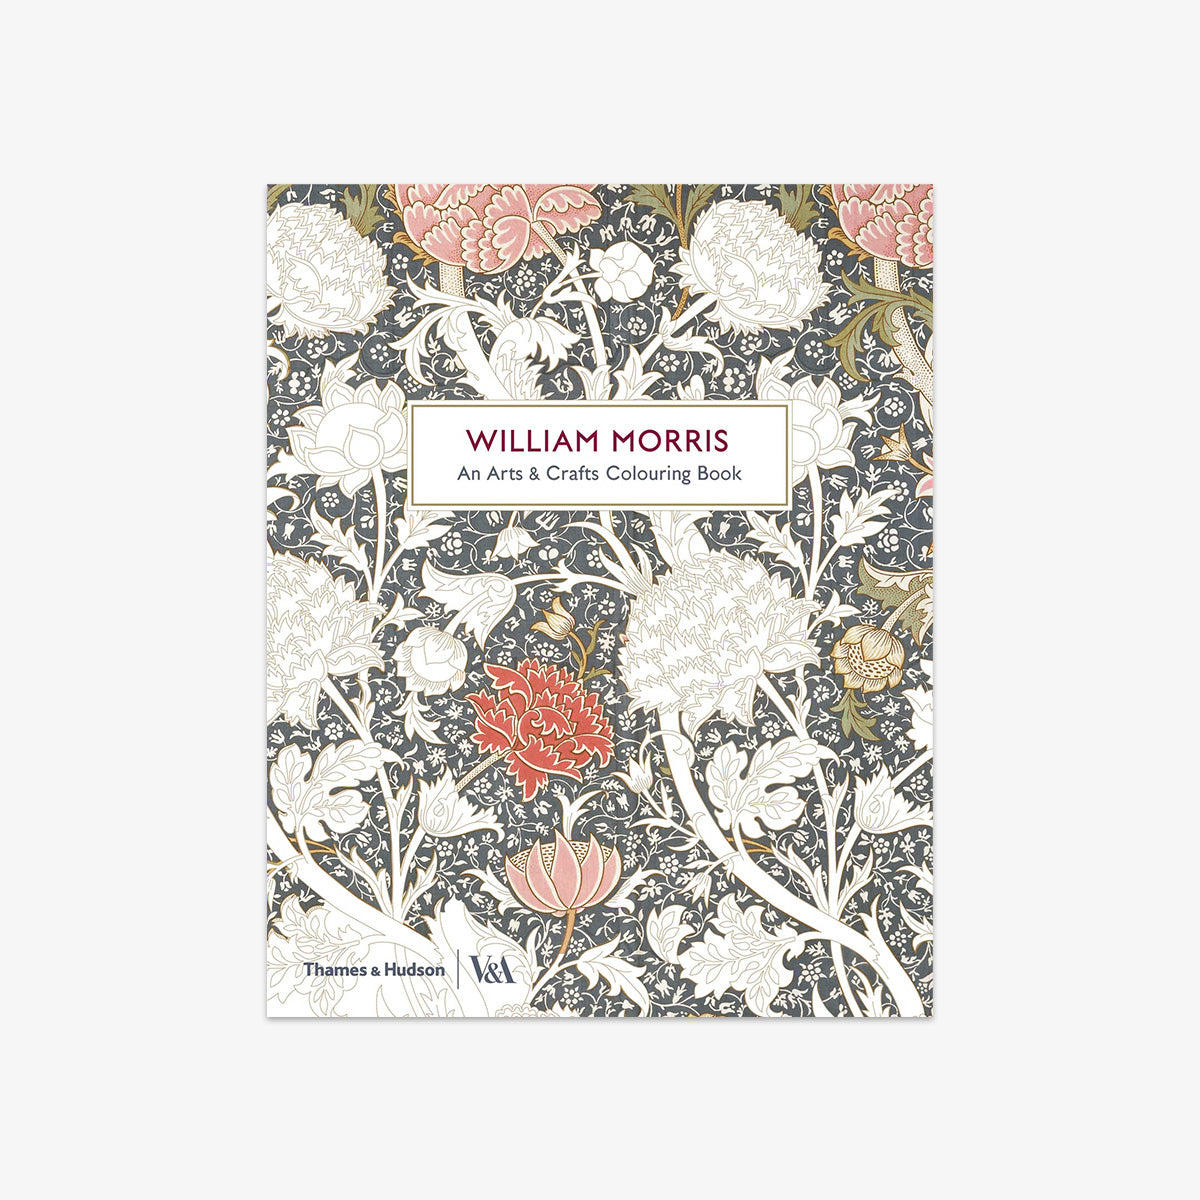 BOOK 'WILLIAM MORRIS - AN ARTS & CRAFTS COLOURING BOOK'